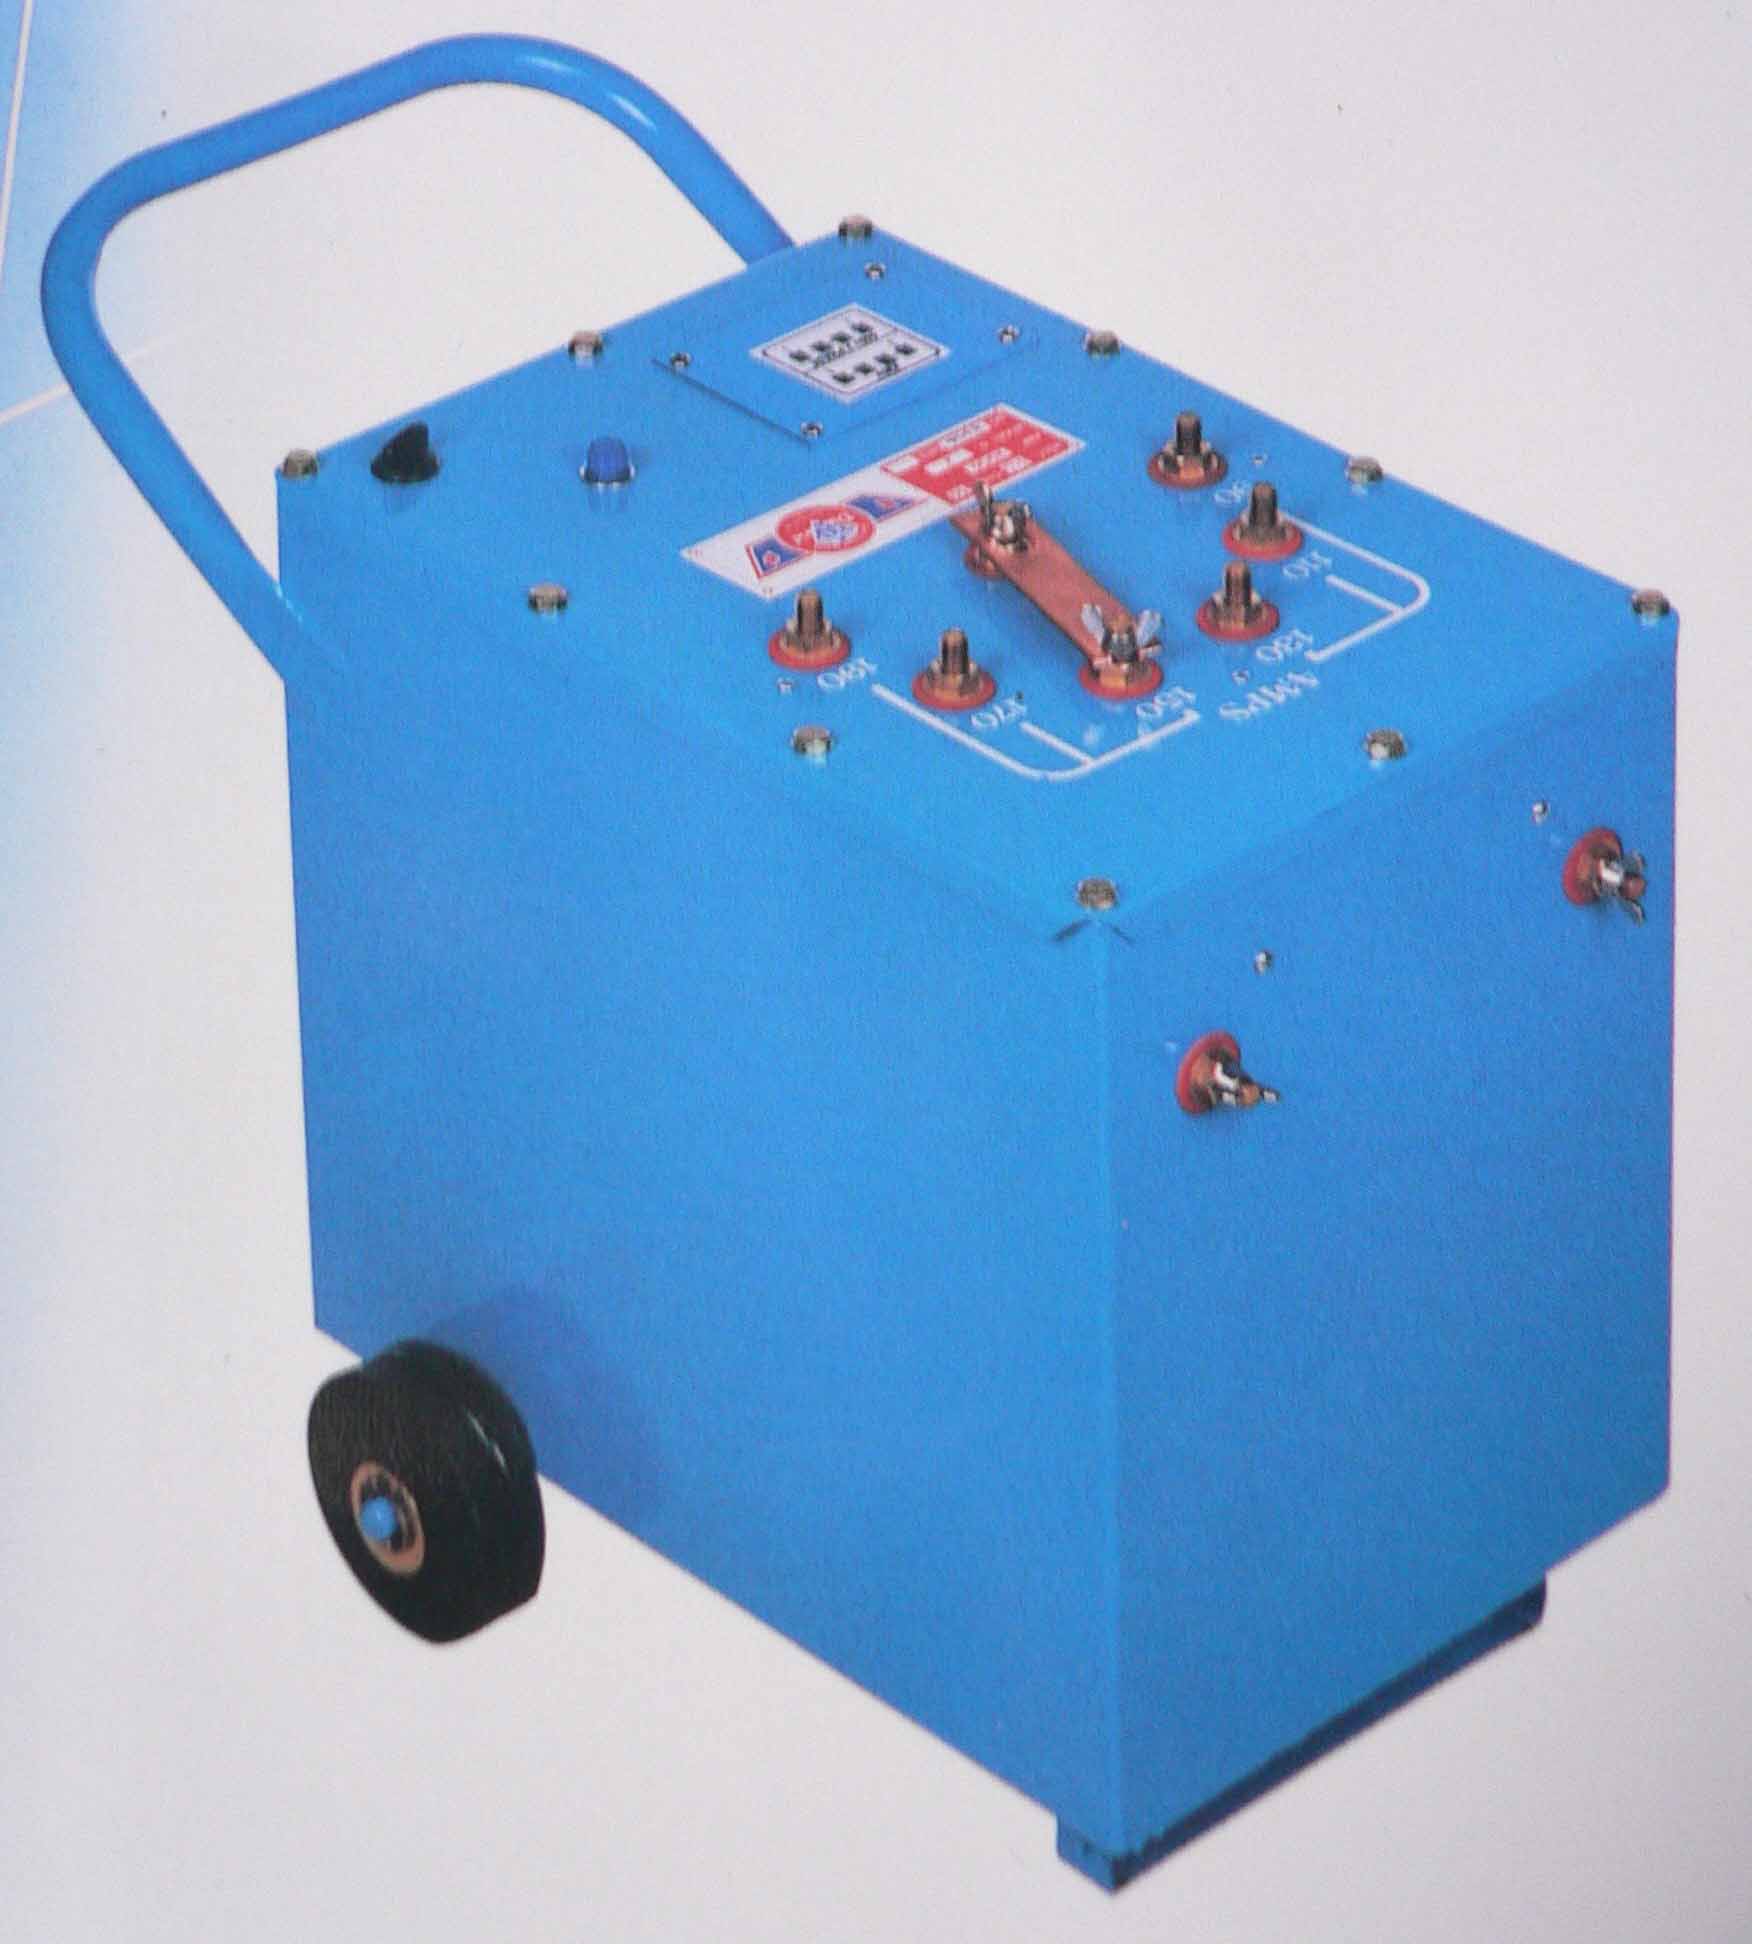 The OC 190 is an efficient, easily transportable, oil-cooled welding machine. 5 welding ranges from 90A to 190A, makes it suitable for electrodes up to 4mm (8SWG).